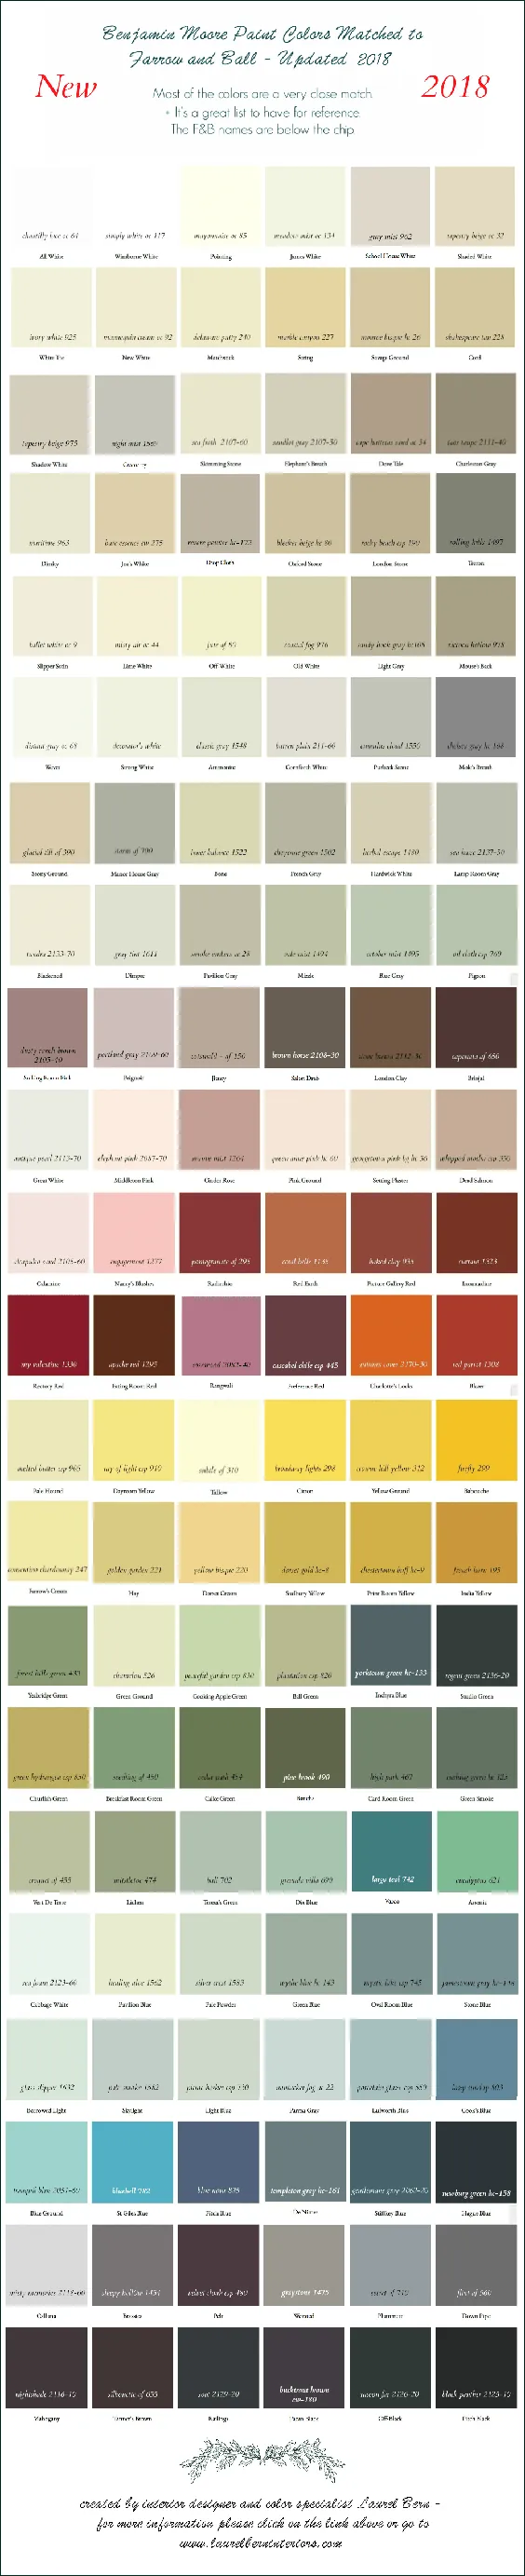 Farrow and Ball Colors Update - 2018 + Matching